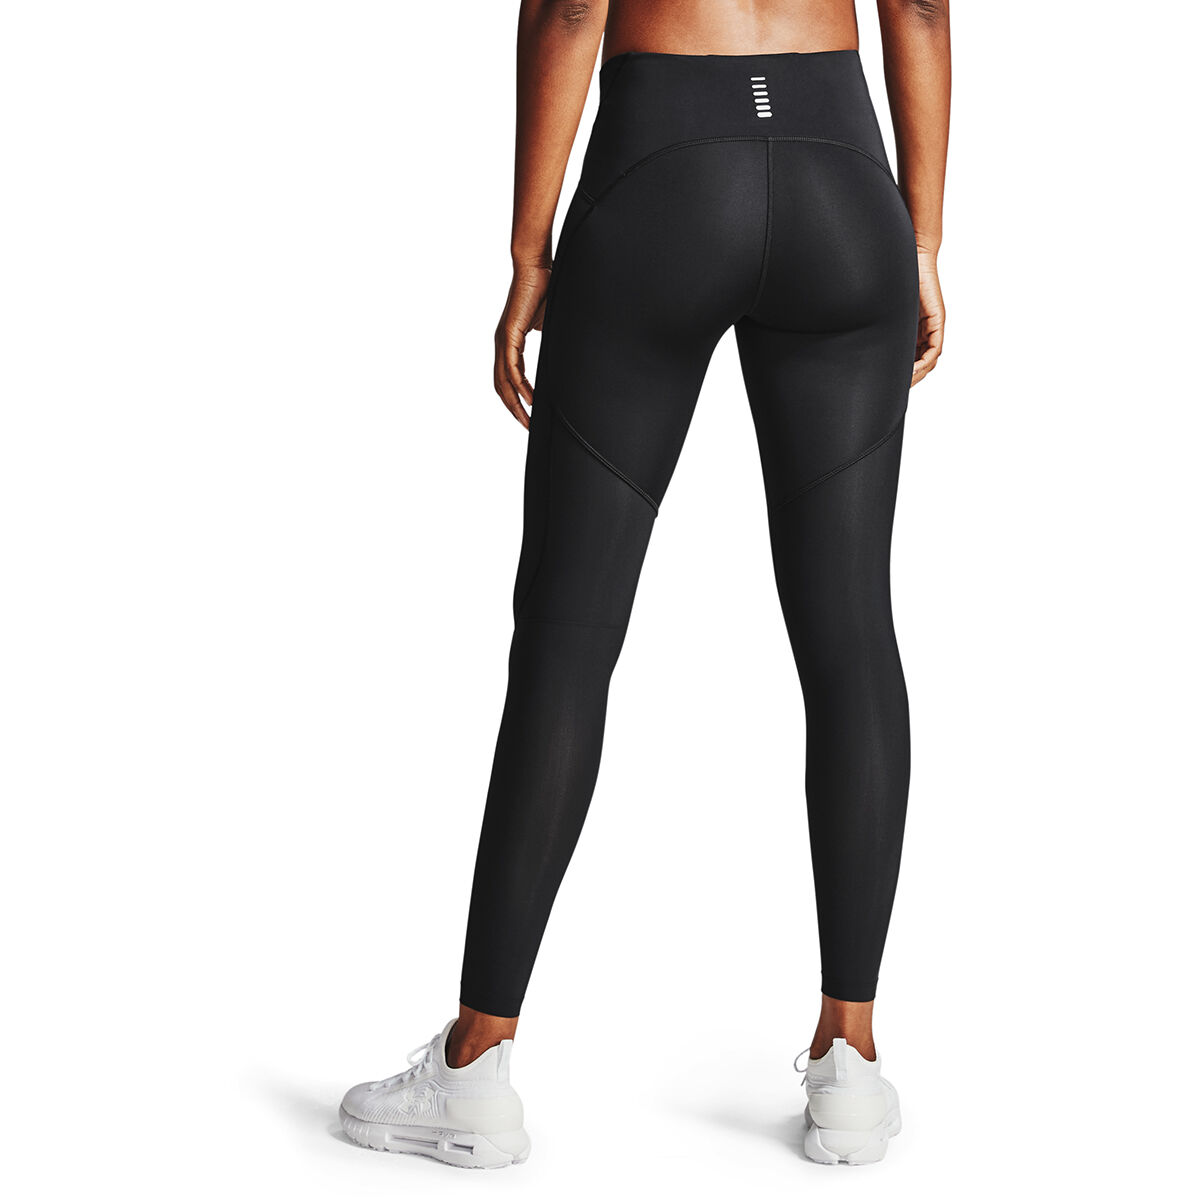 Under Armour Women's Fly Fast 2.0 ColdGear Tight Leggings, Black  (001)/Reflective, X-Small, Leggings -  Canada